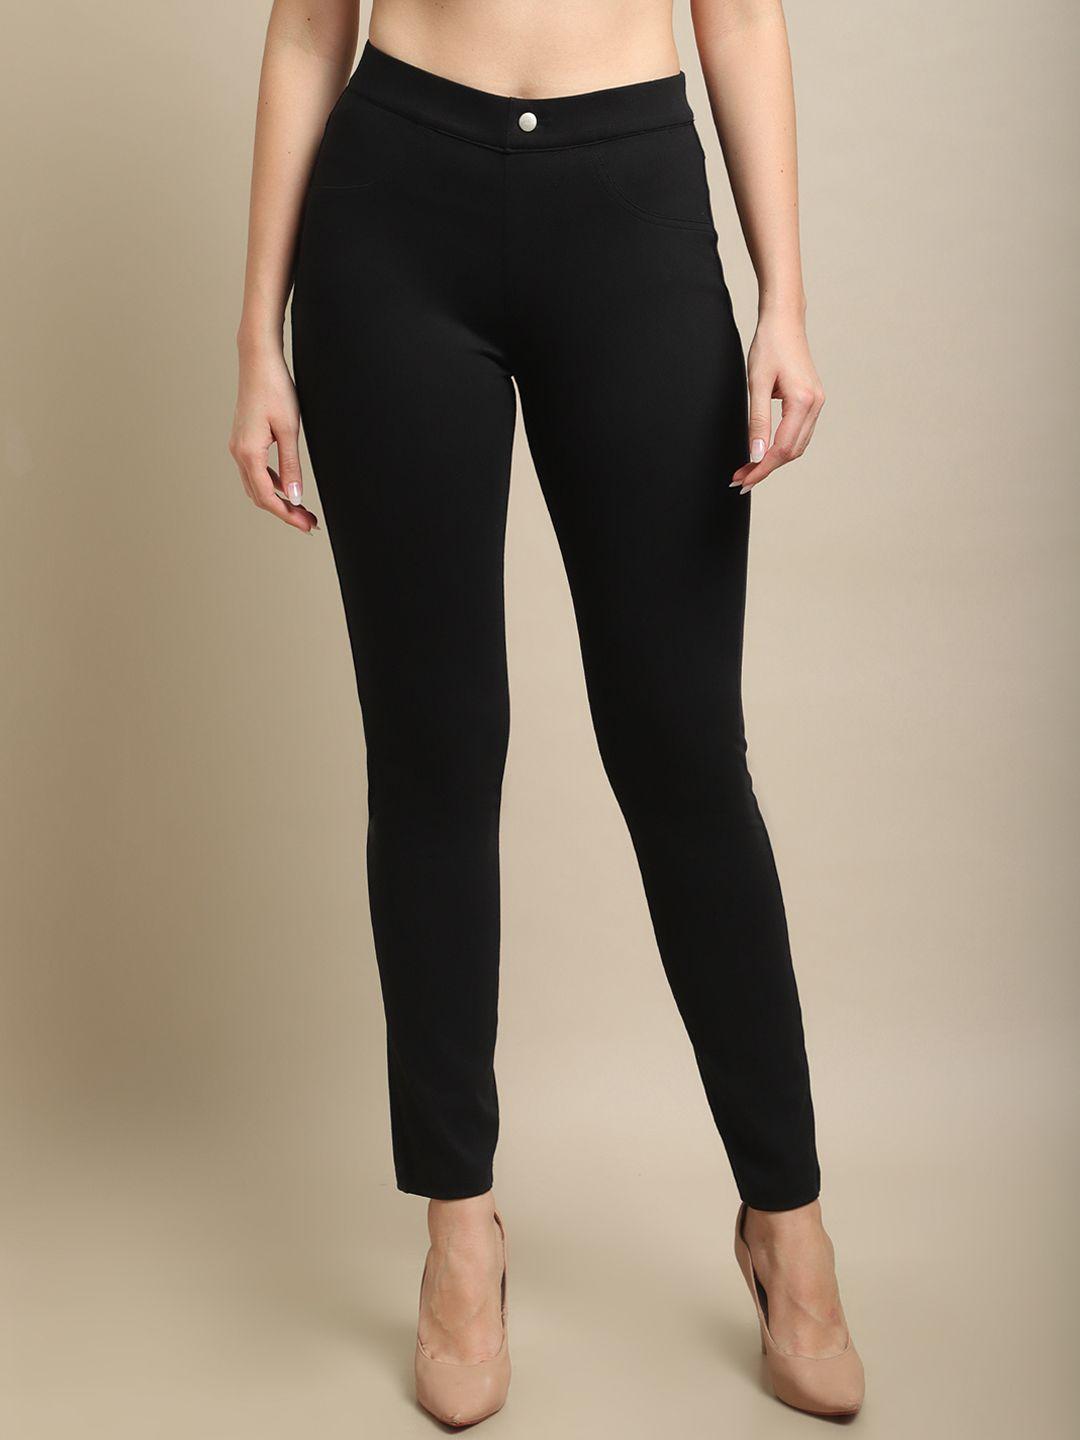 crozo-by-cantabil-women-mid-rise-regular-trousers